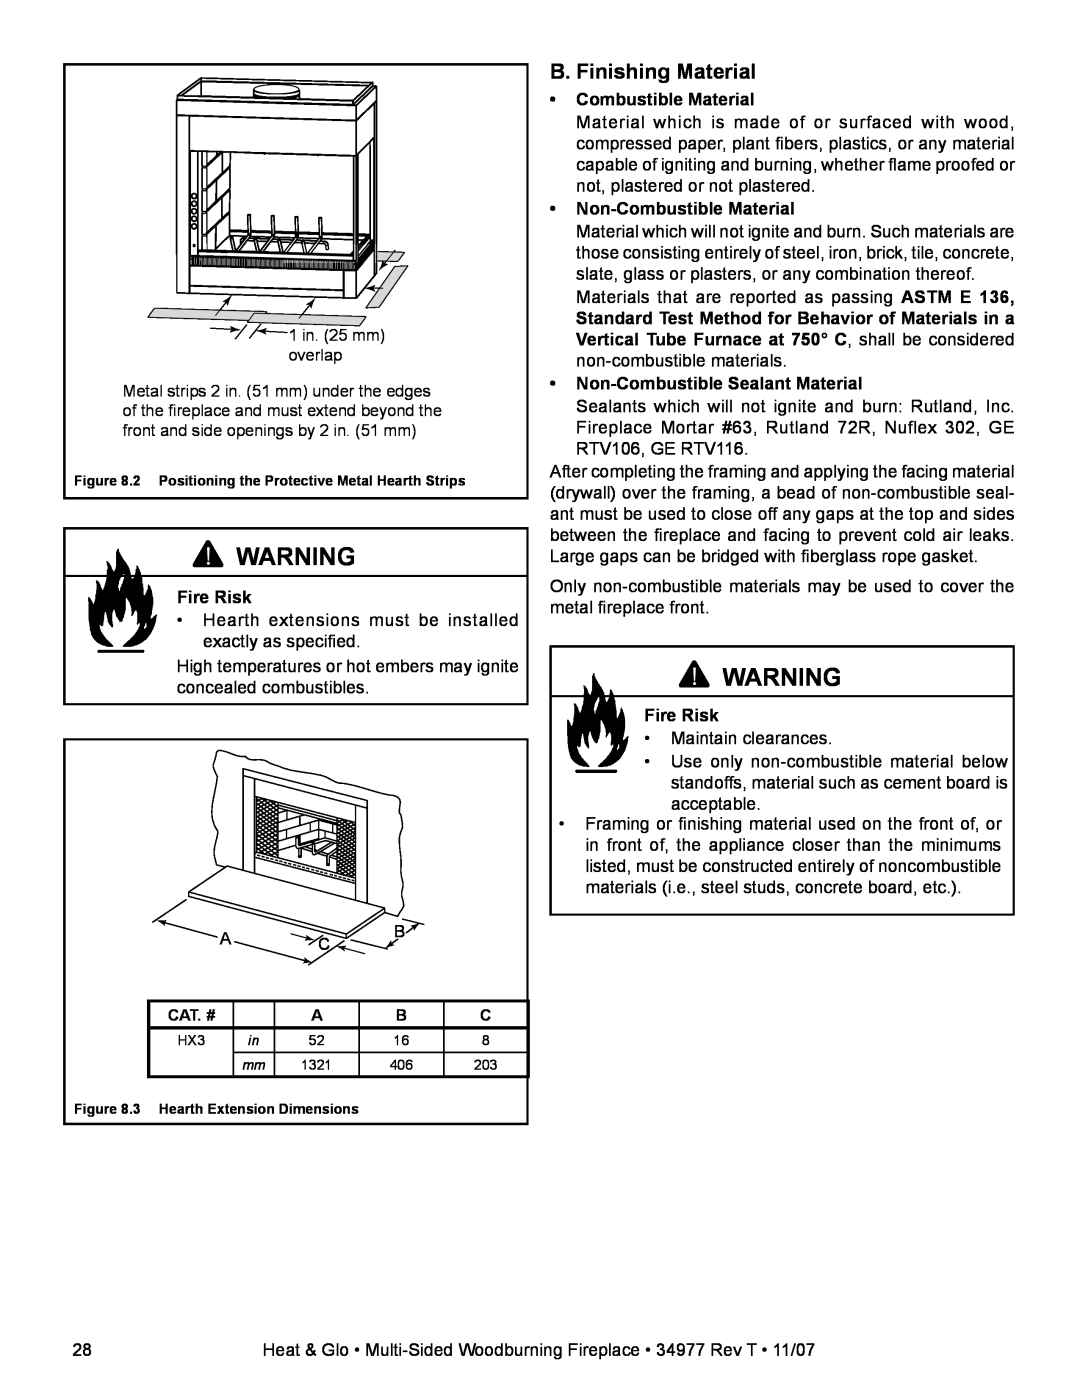 Heat & Glo LifeStyle BAY-40 owner manual B. Finishing Material, Fire Risk, Non-Combustible Material 